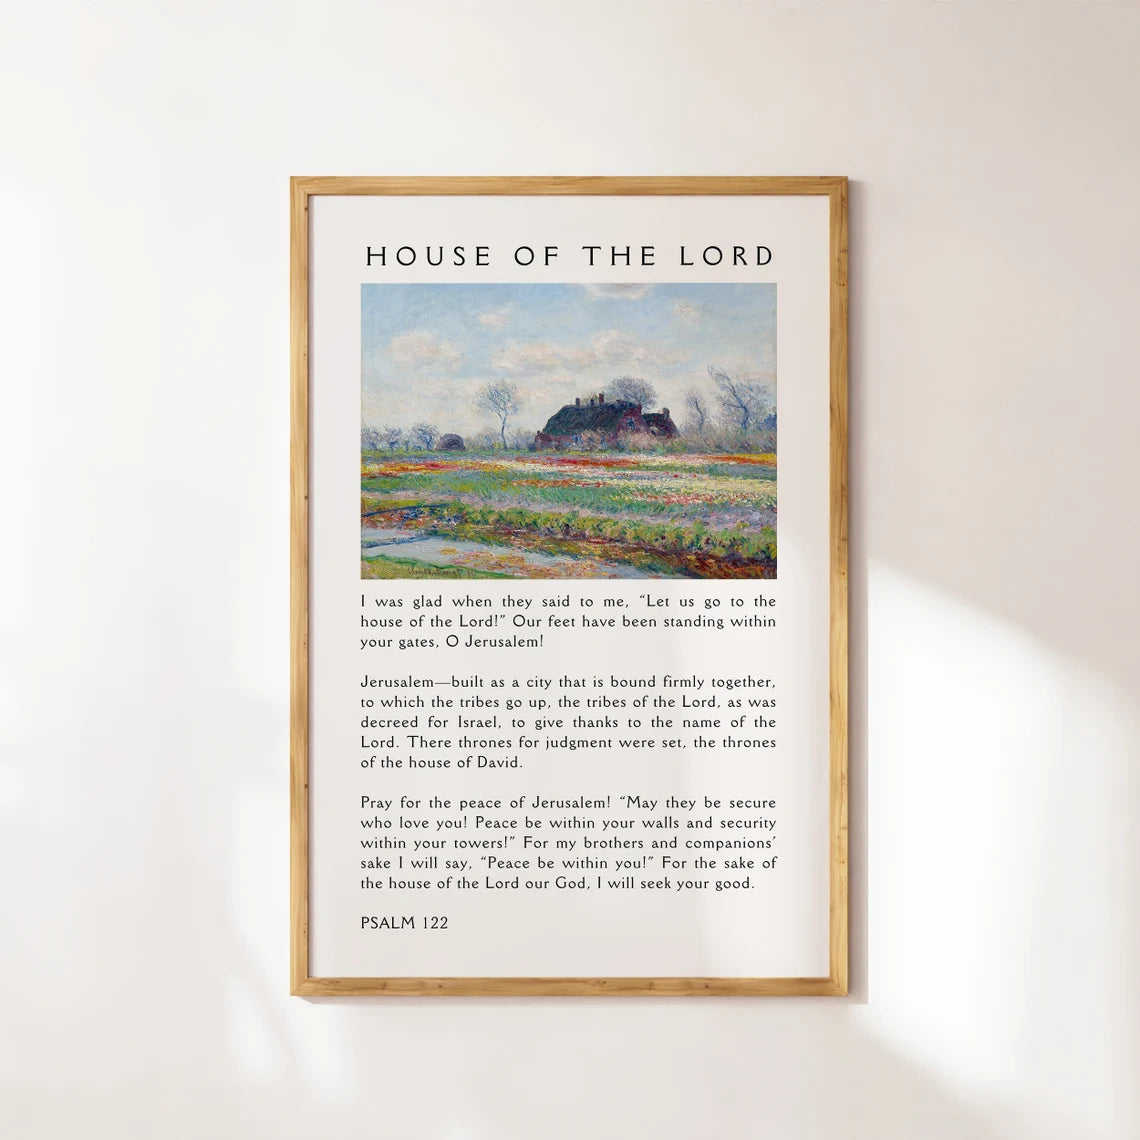 HOUSE OF THE LORD.